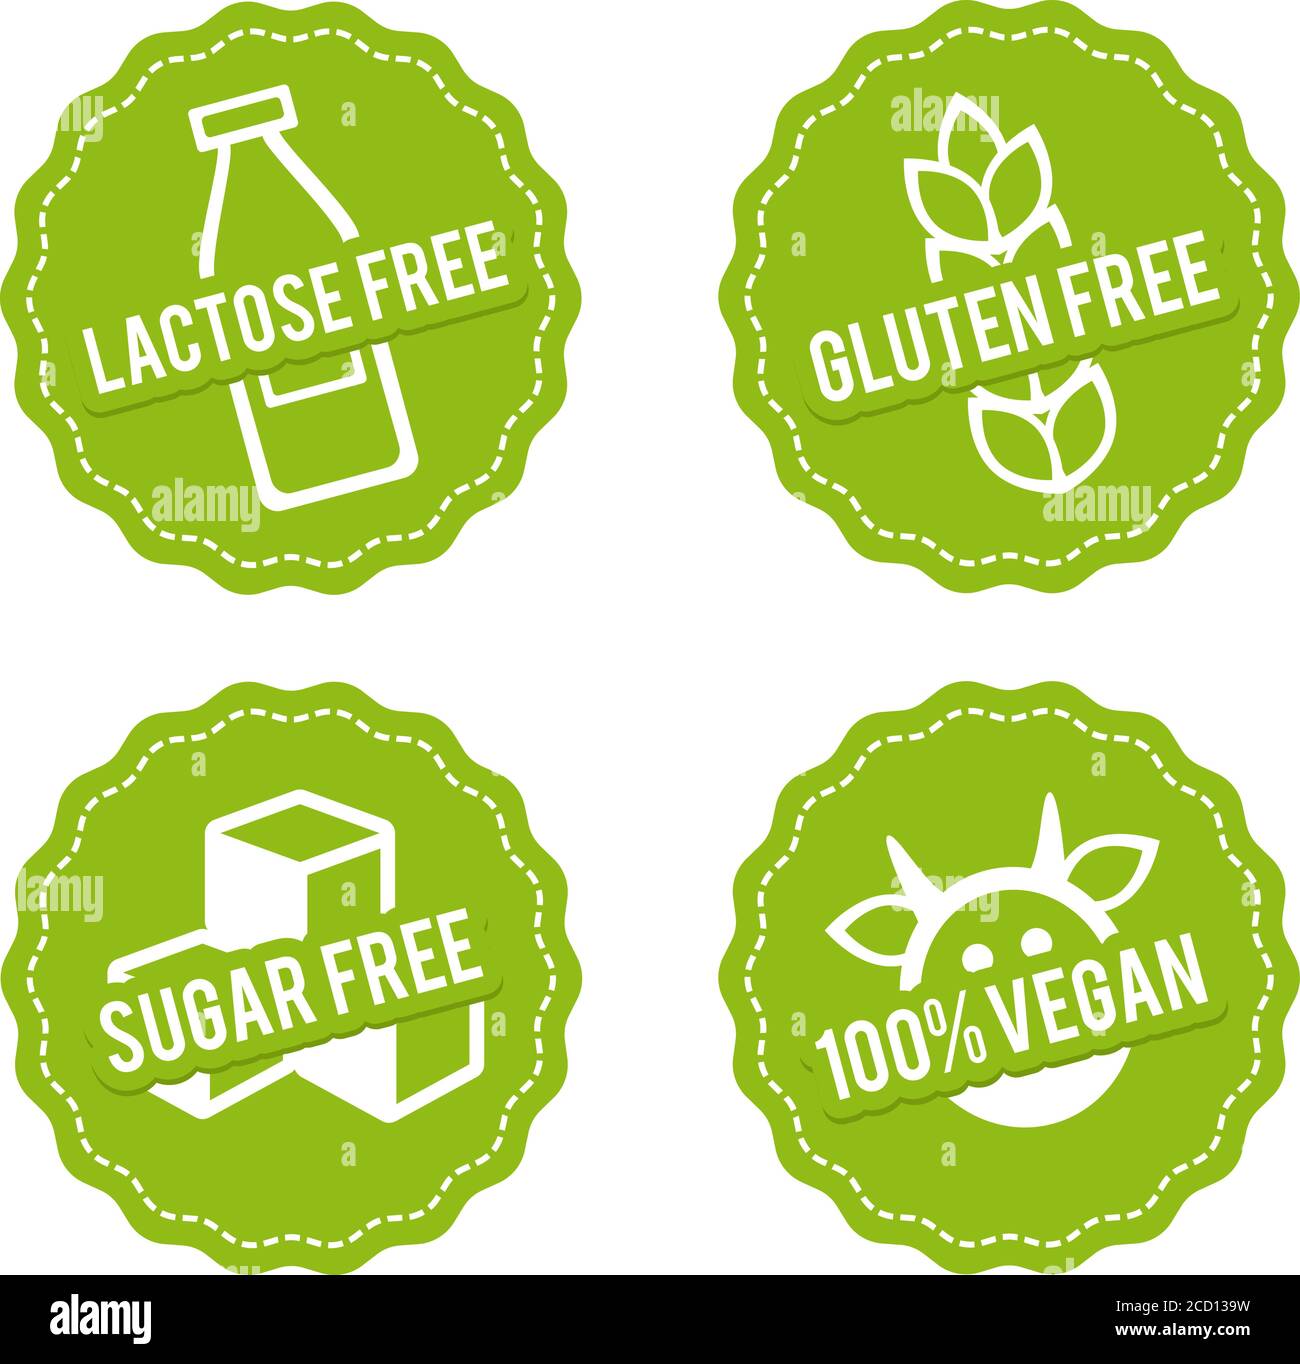 Set of Allergen free Badges. Lactose free, Gluten free, Sugar free, 100% Vegan. Vector hand drawn Signs. Can be used for packaging Design. Stock Vector